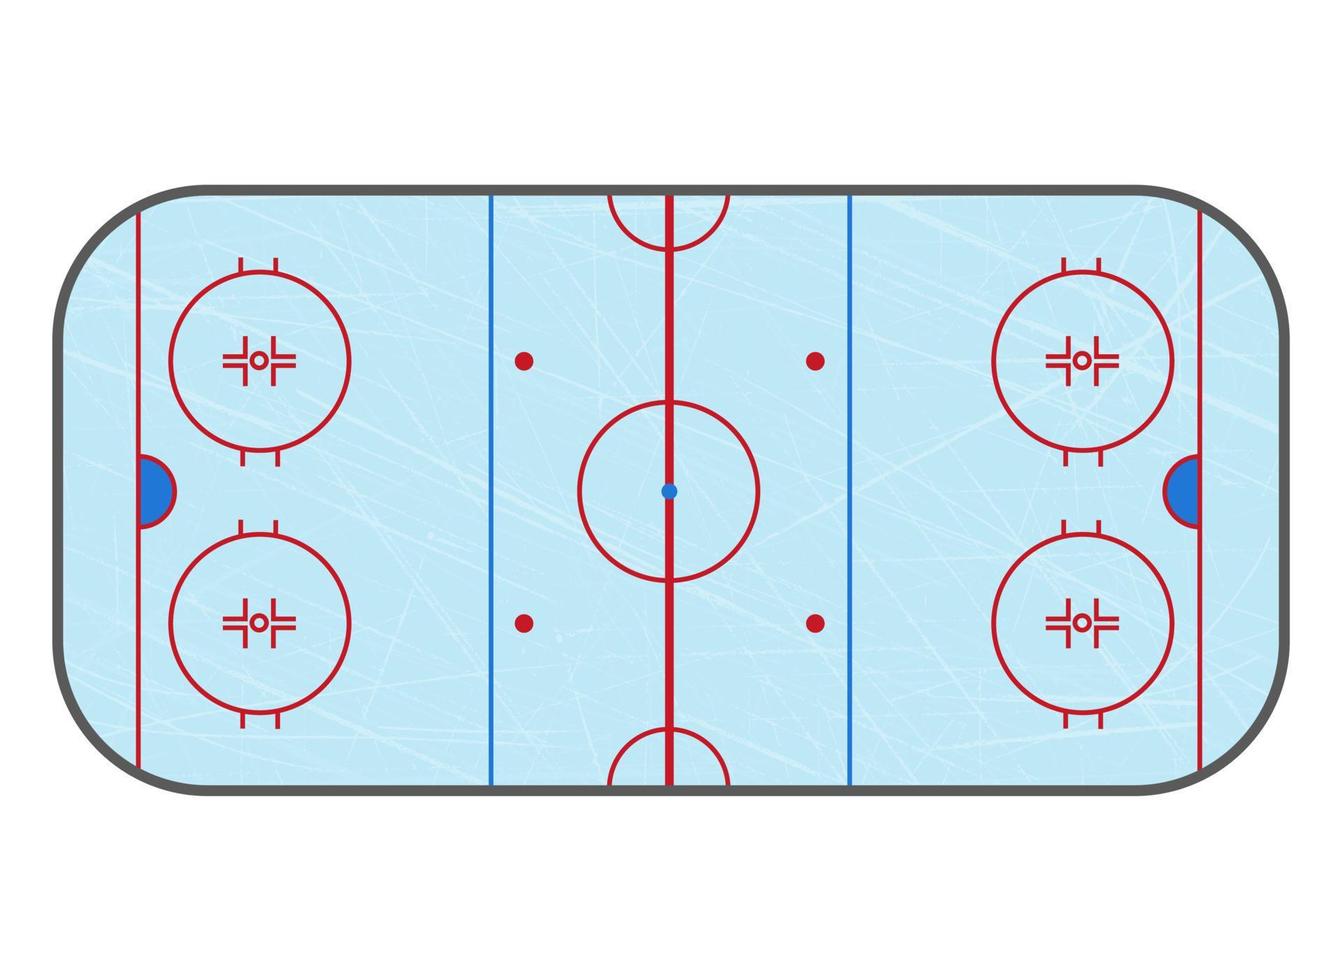 Ice hockey rink. Top view arena with scratches. Blue ice texture. Vector illustration